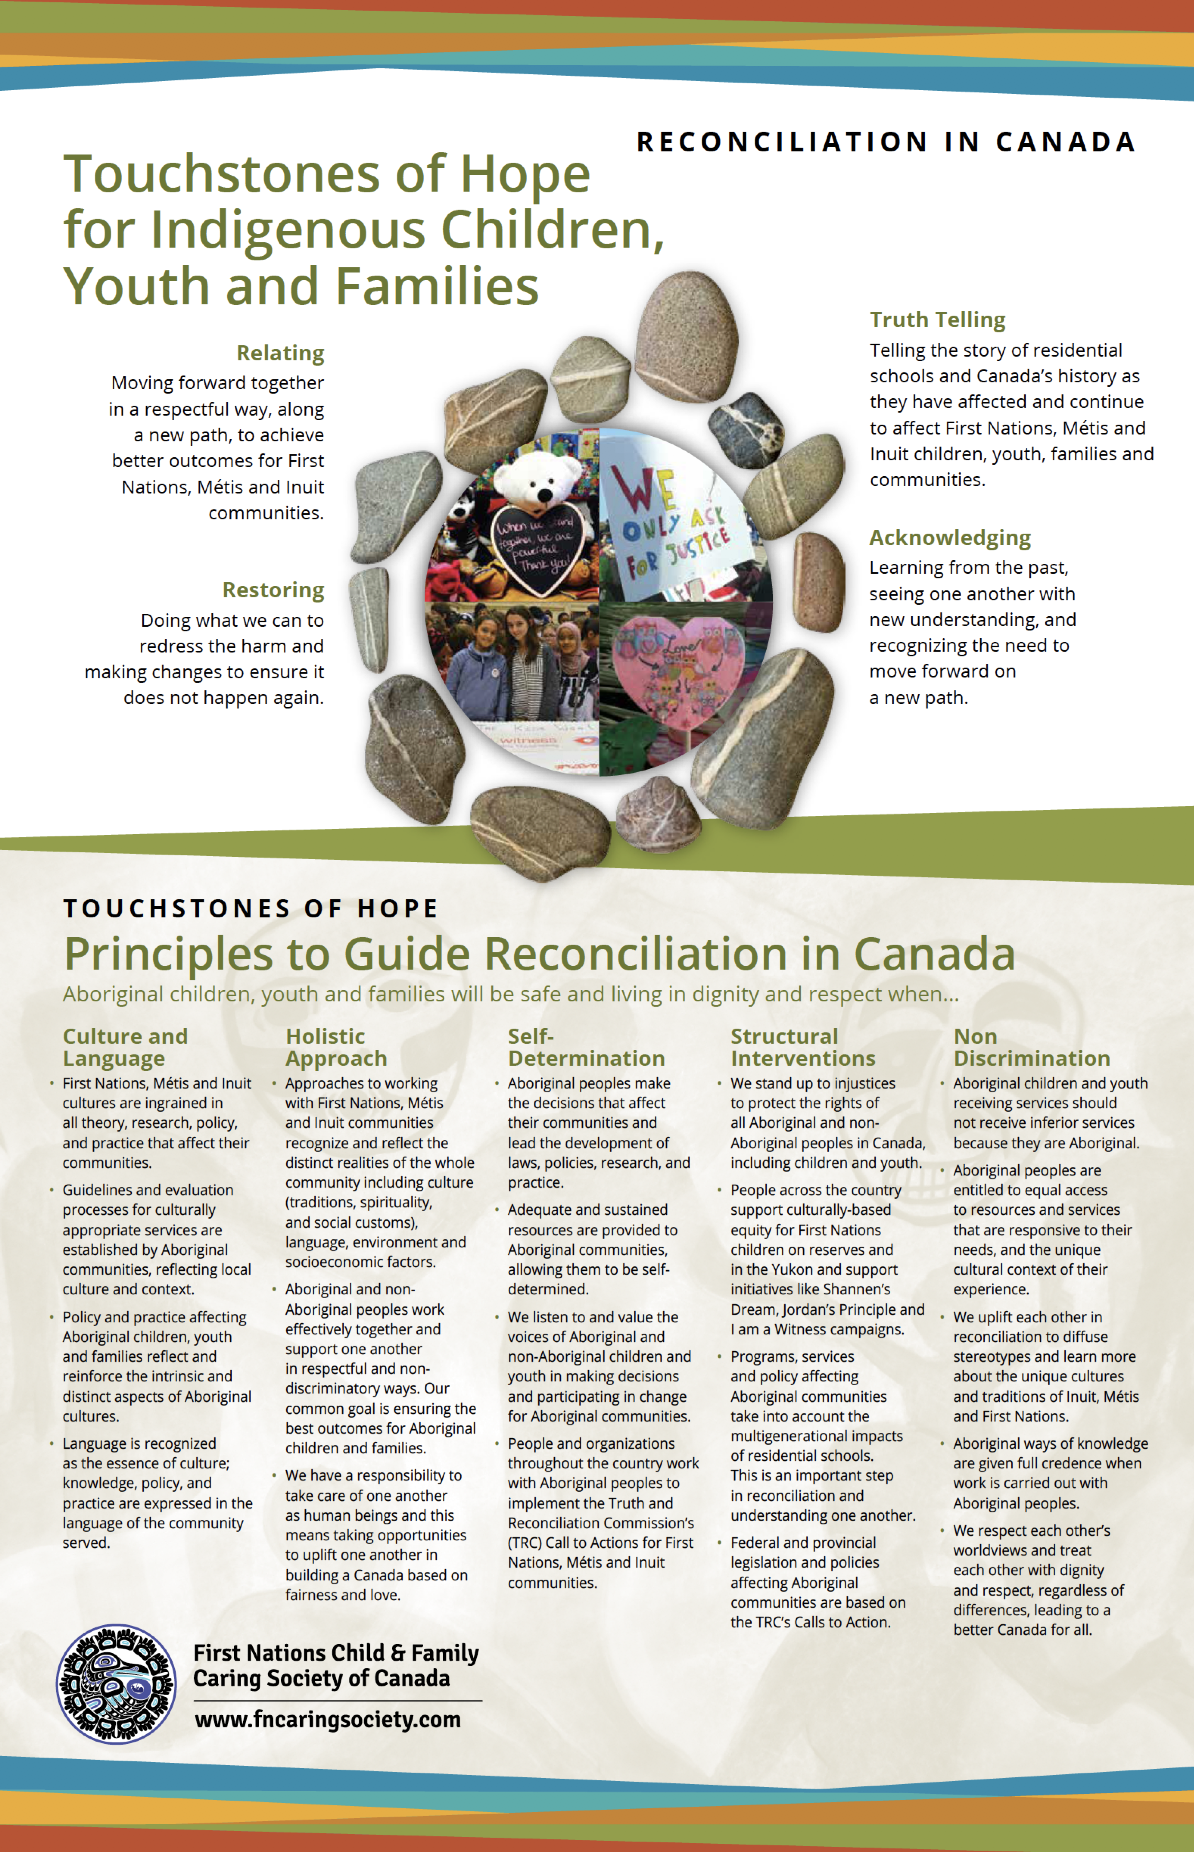 Touchstones of Hope: Reconciliation in Canada Poster